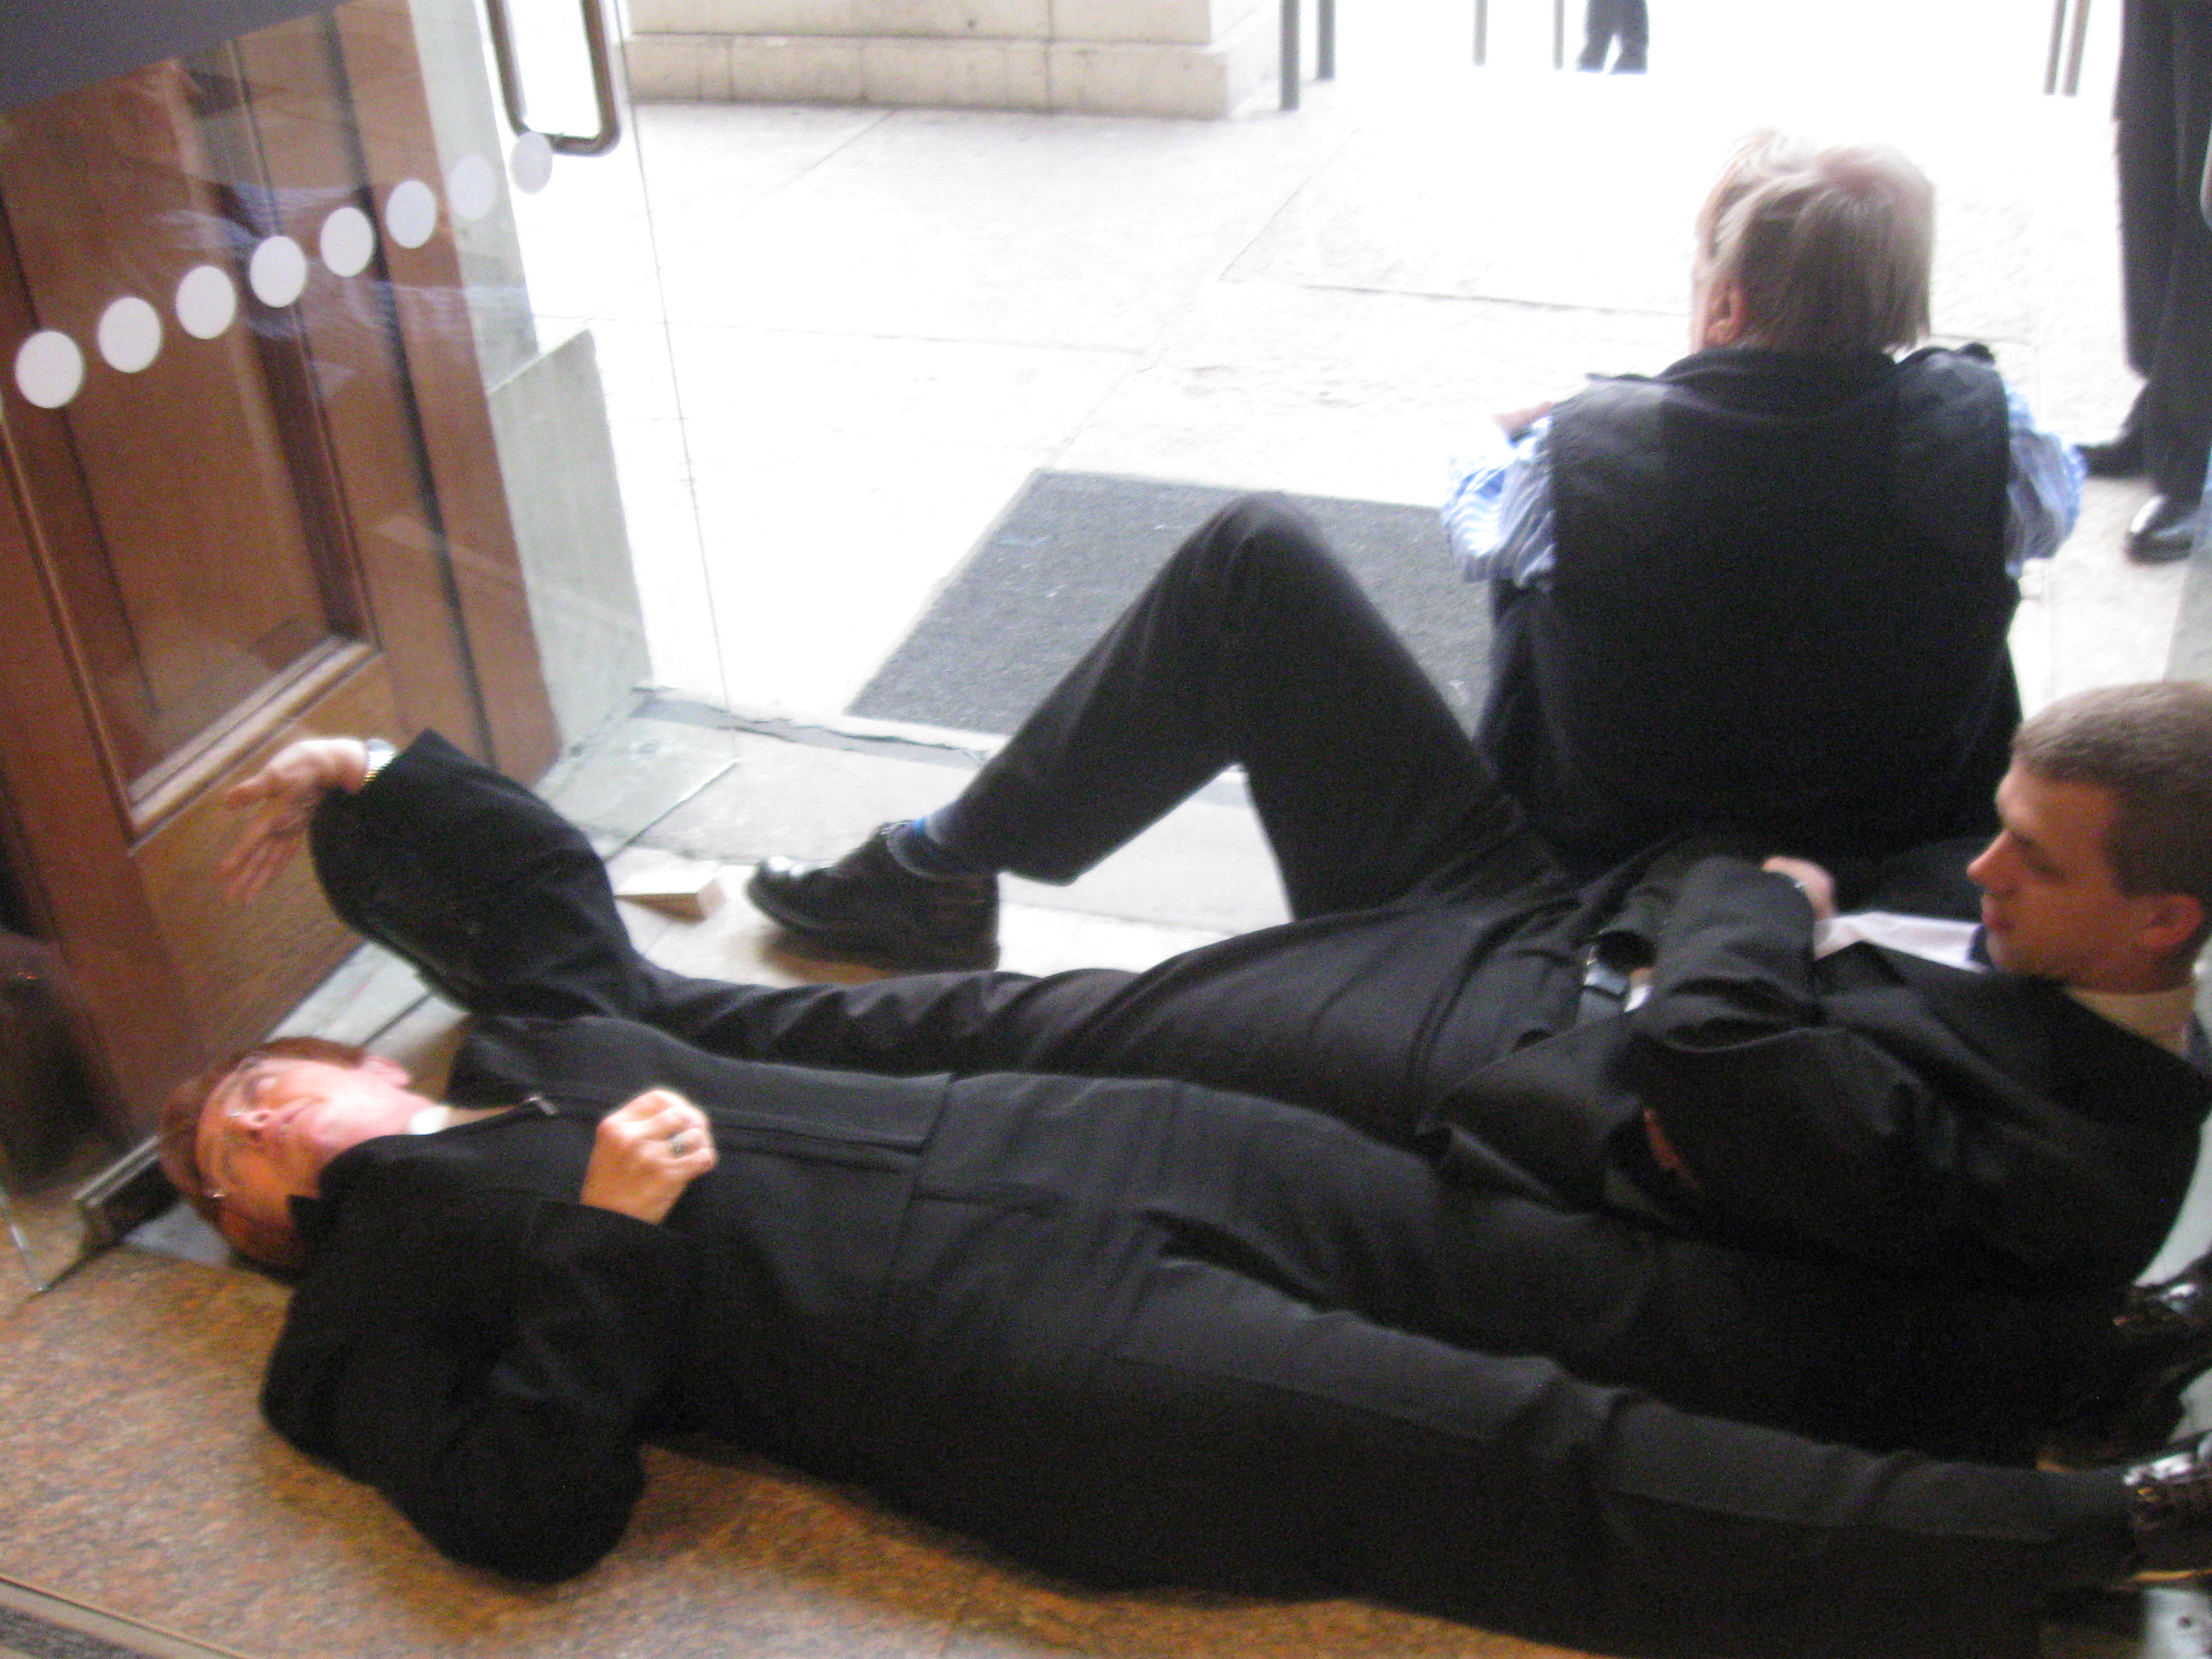 Protesters blocked every doorway to the Imperial War Museum as arms dealers arrived